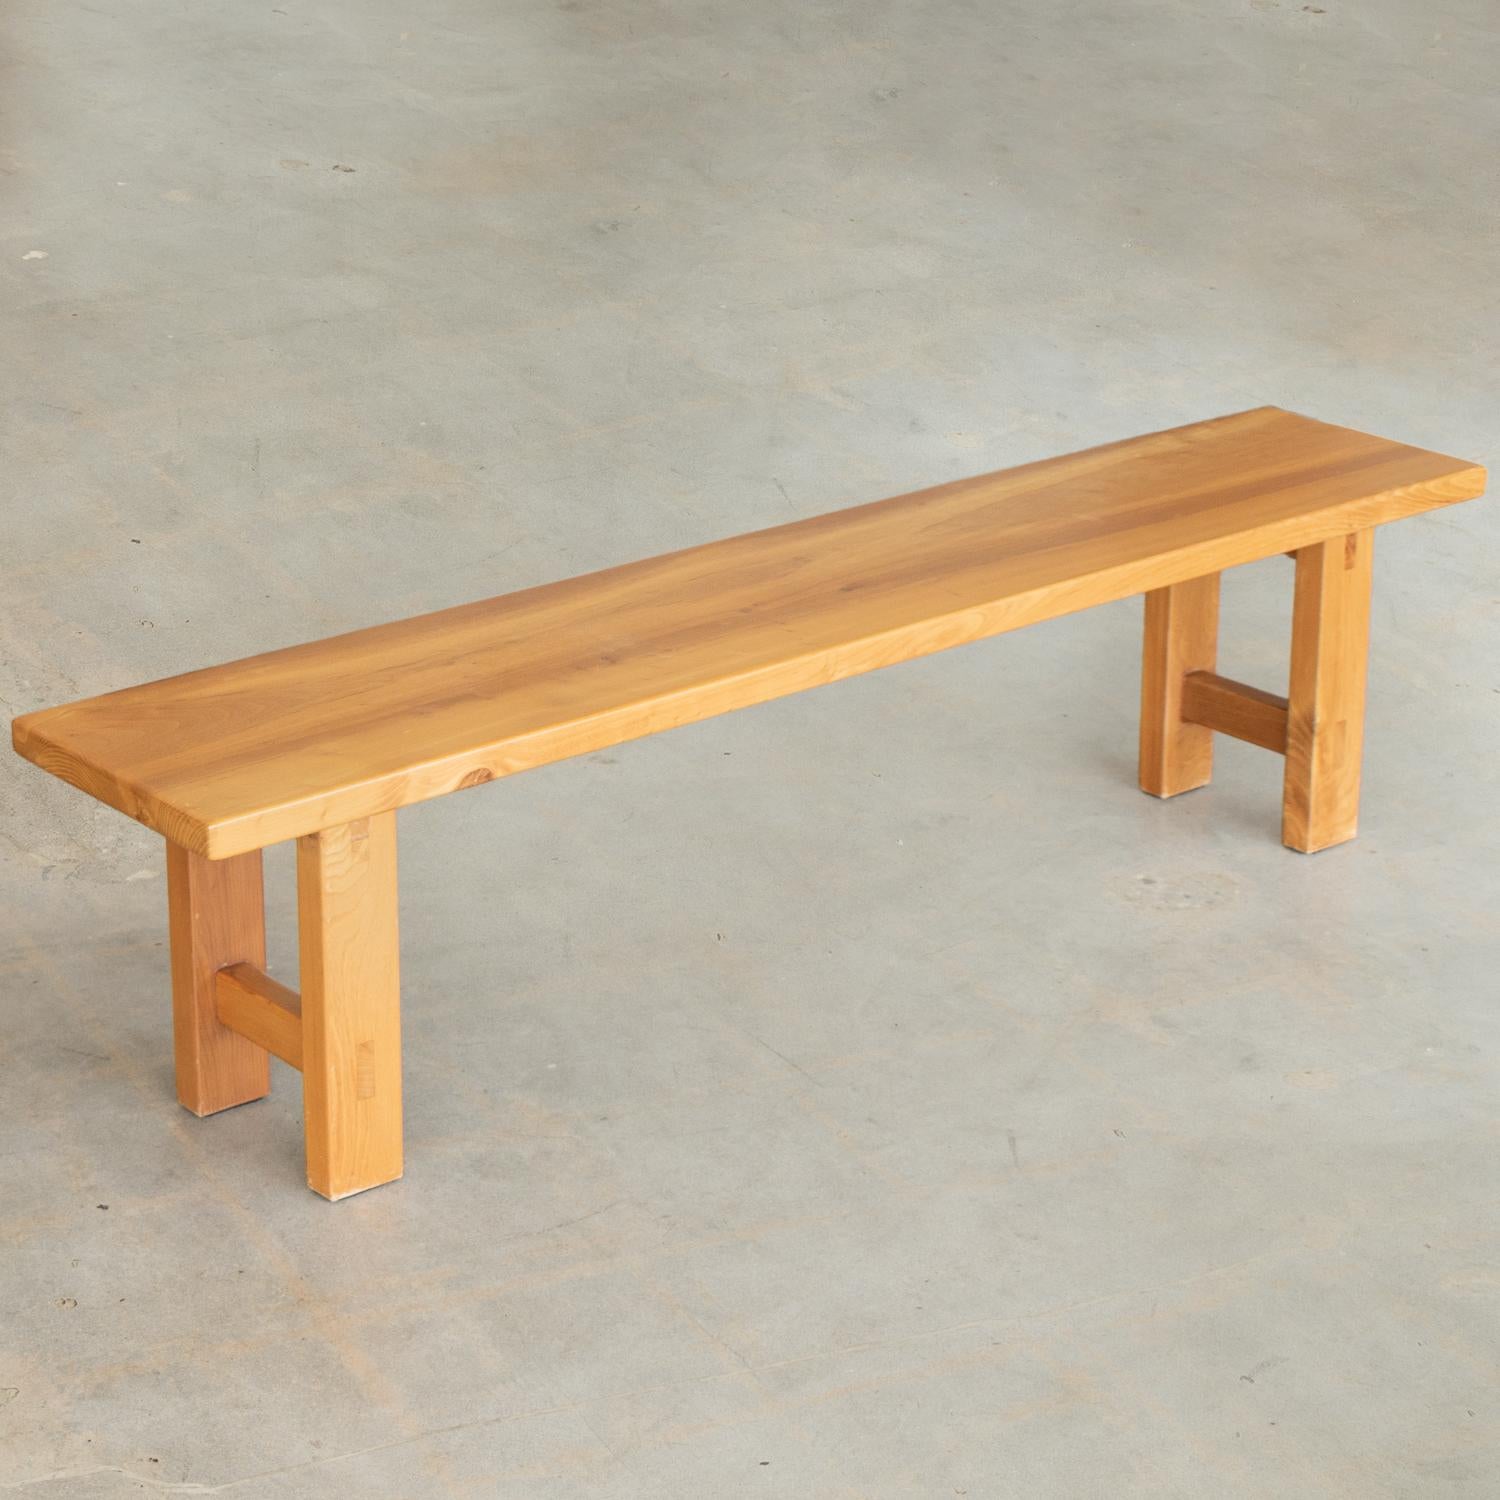 Great long wood elm bench from France by Maison Regain with light wood plank seat and solid wood legs. Original wood finish showing great age, patina, and wear.